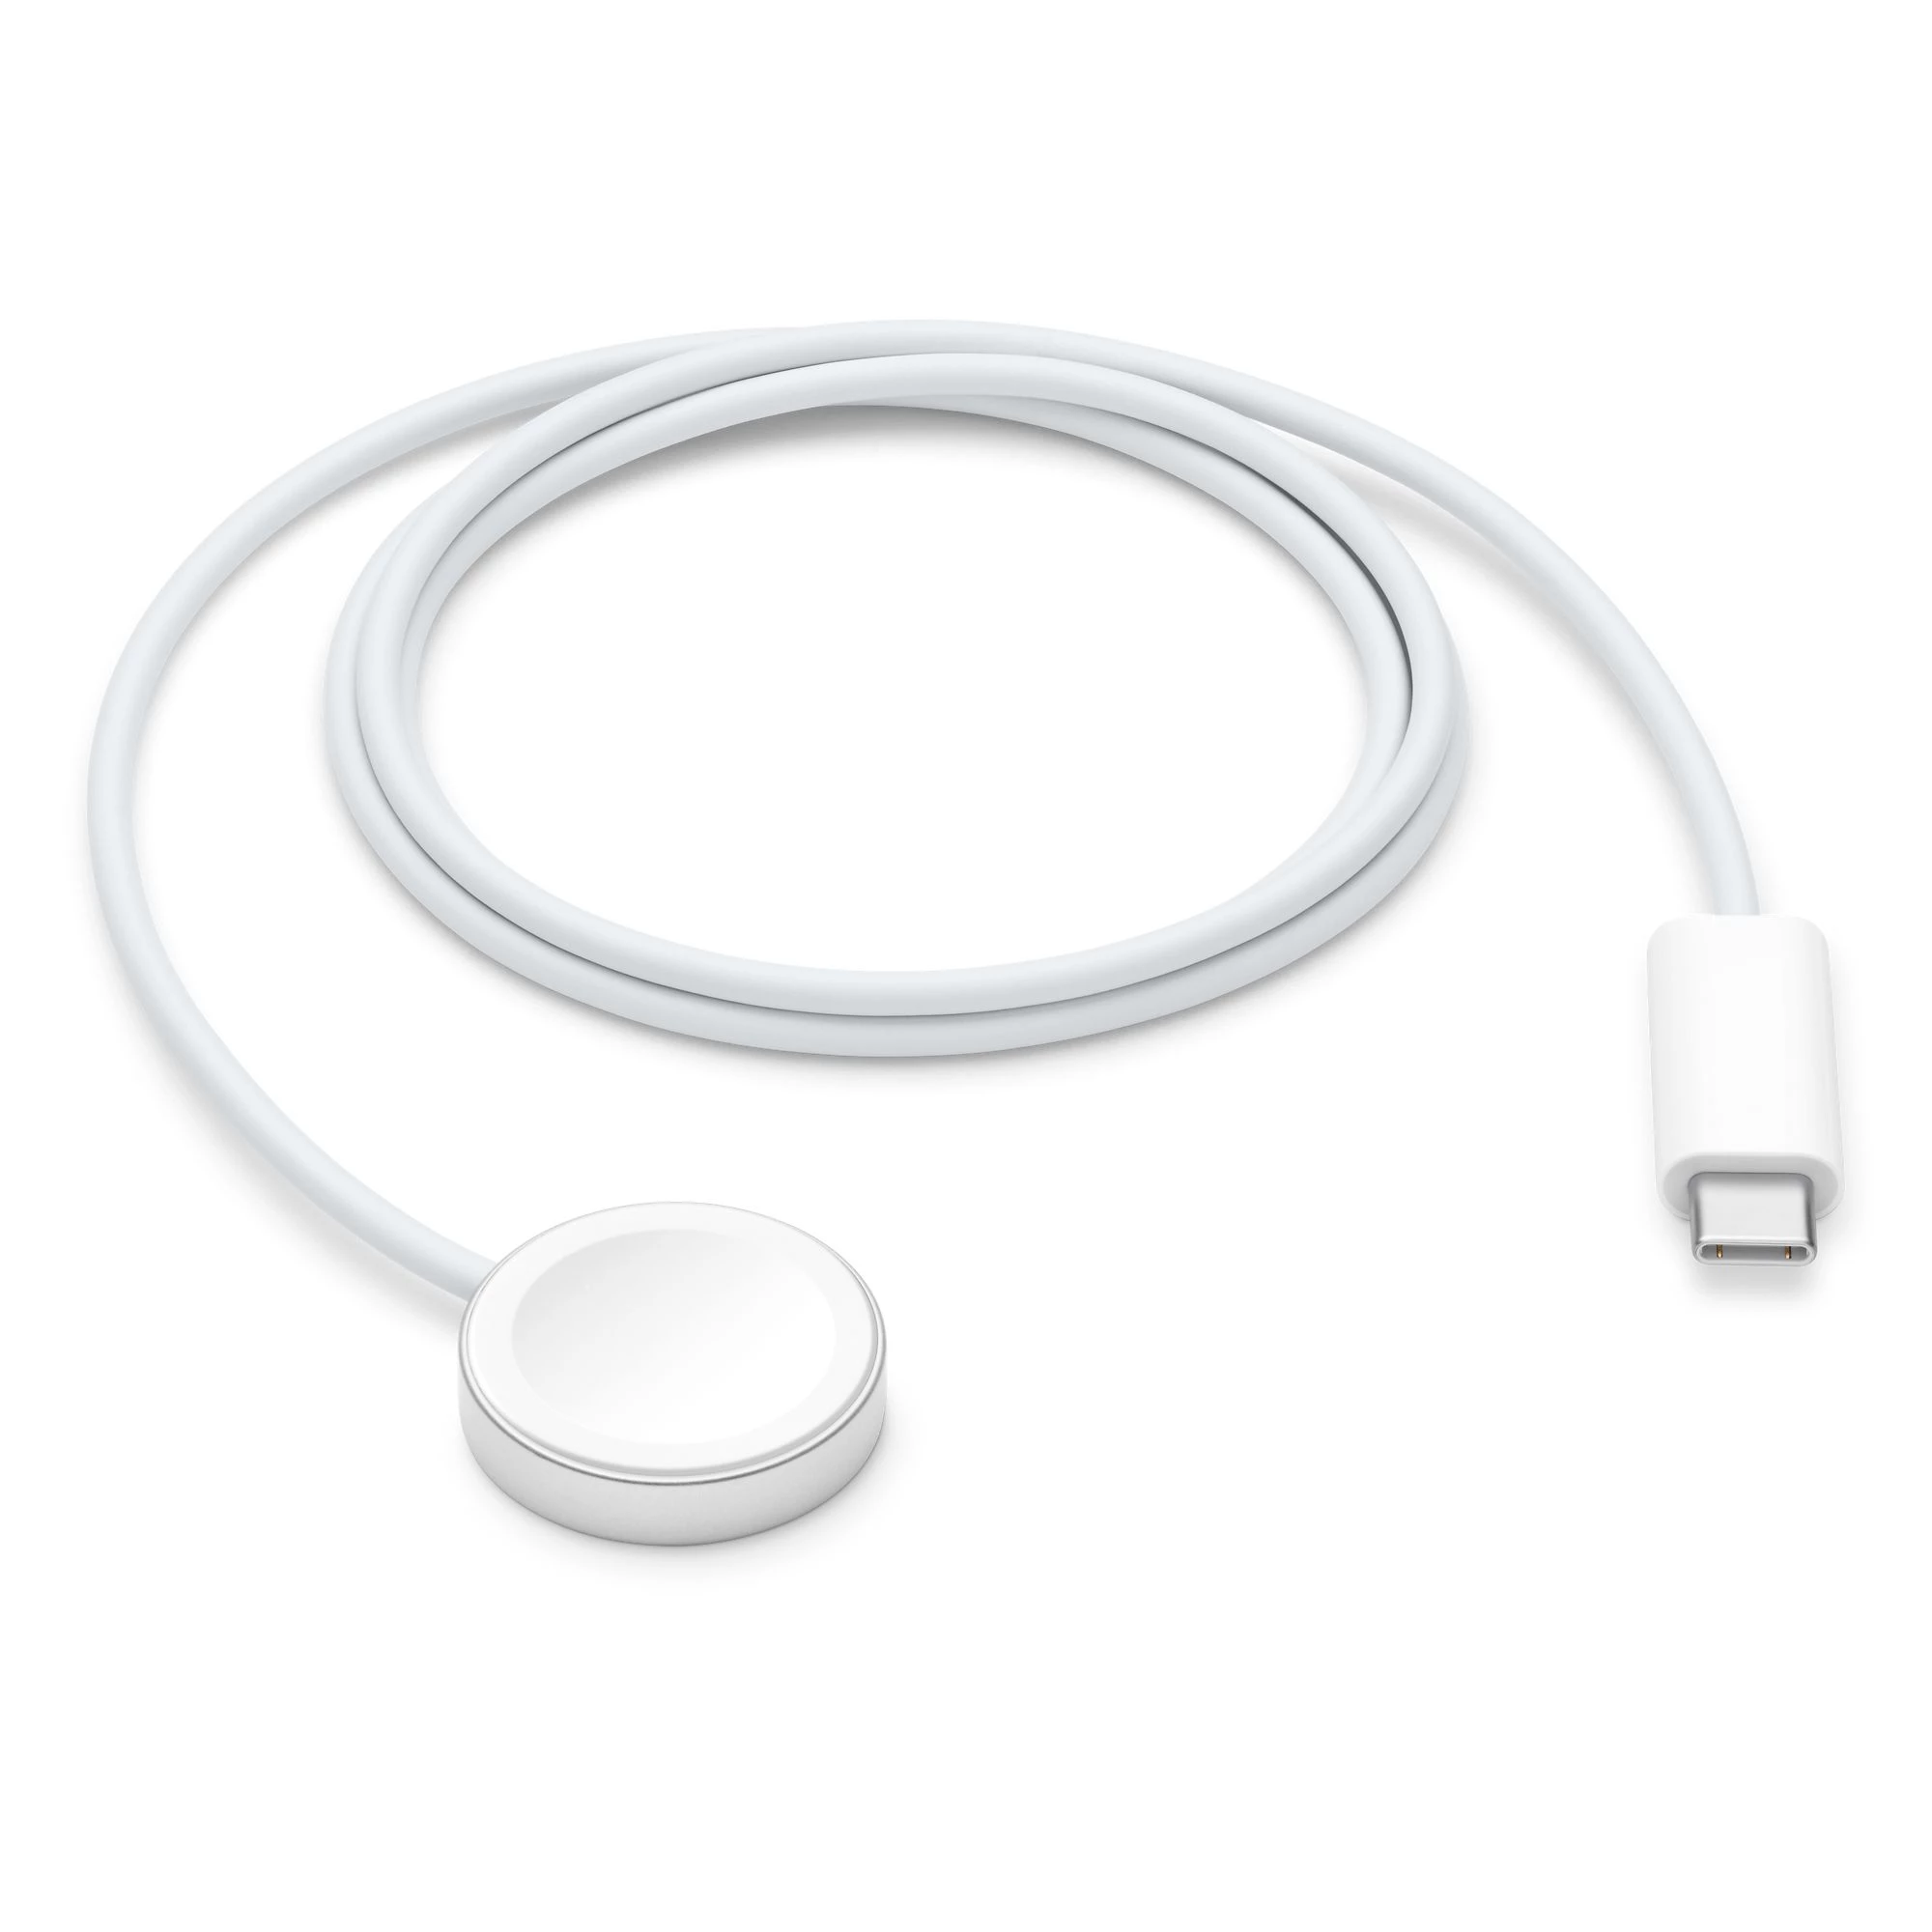 NO BOX Apple Watch Magnetic Fast Charger to USB-C Cable (1 m) (MLWJ3) (с комплекта Apple Watch)